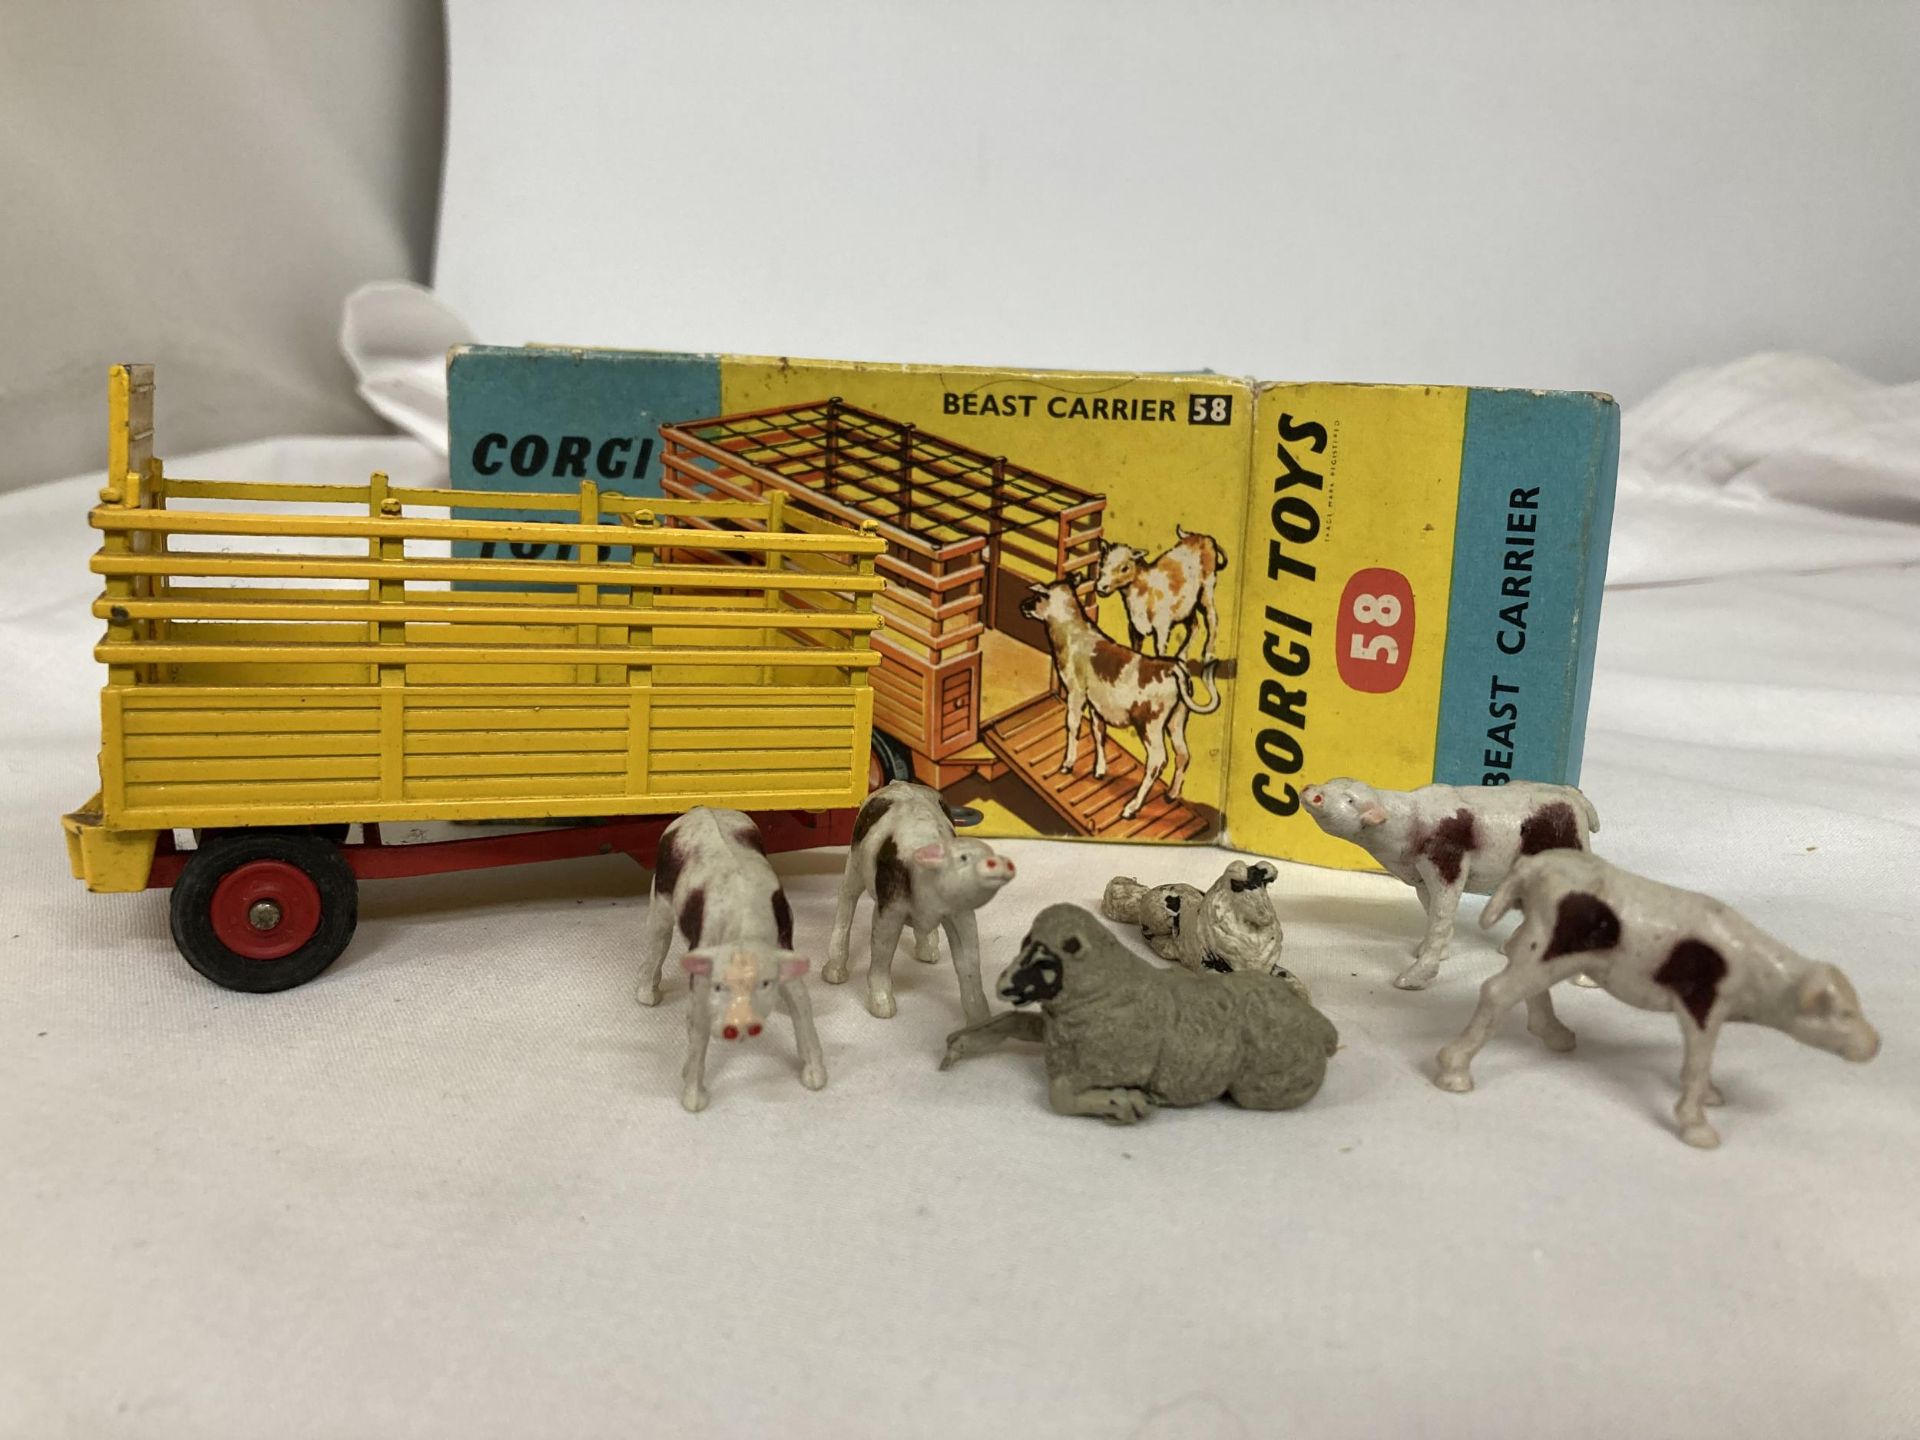 TWO BOXED CORGI MODELS NO. 58 - BEAST CARRIER WITH ANIMALS AND NO. 50 - A MASSEY FERGUSON 65 TRACTOR - Image 2 of 3